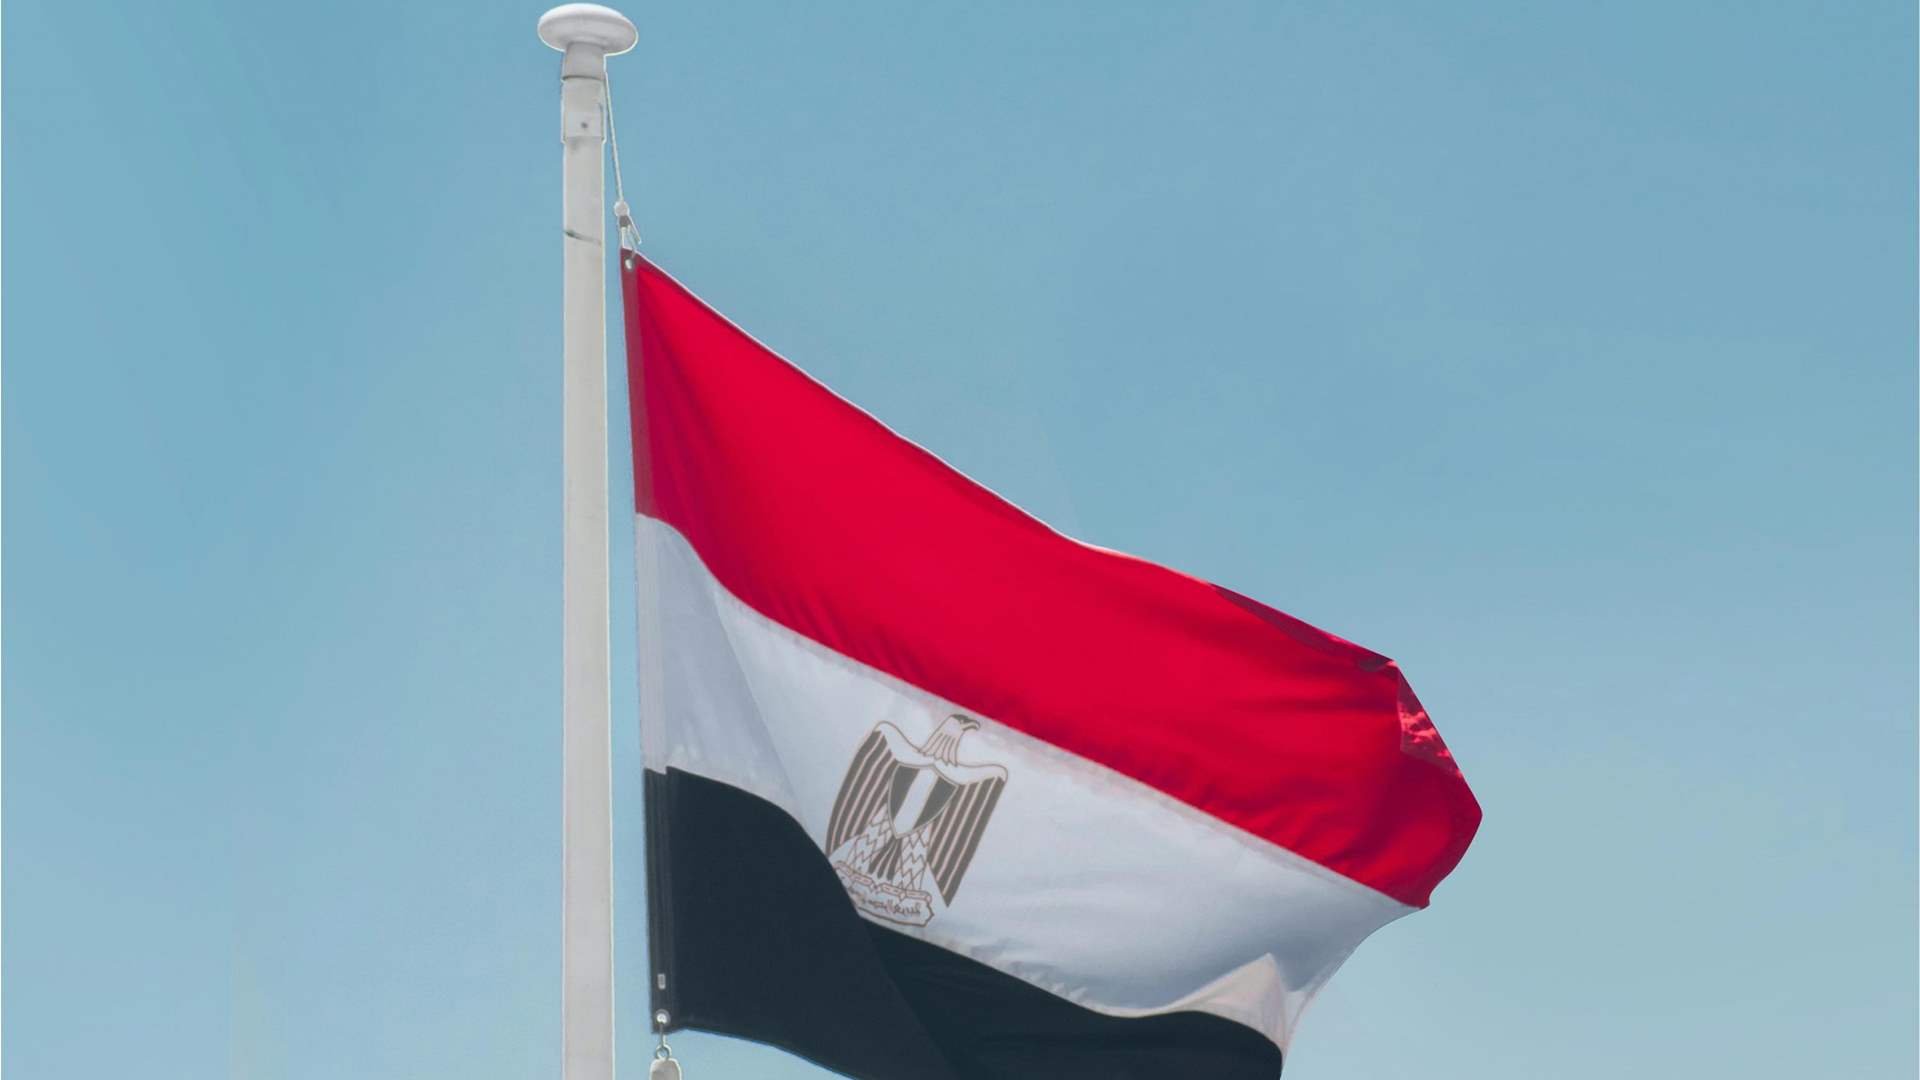 Egypt condemns Israeli escalation policy and warns of severe security consequences on region